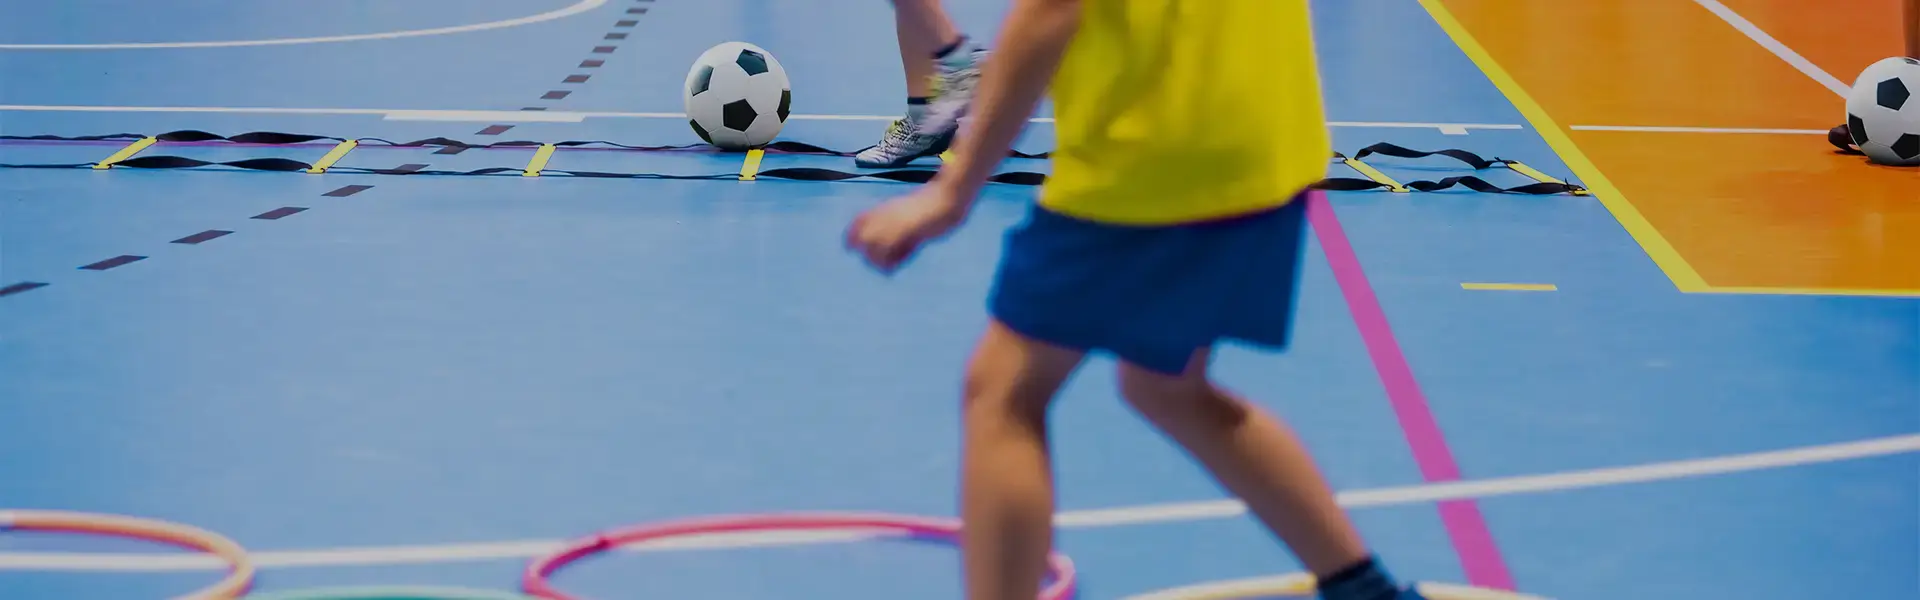 Indoor Sports Facilities - The Perfect Solution